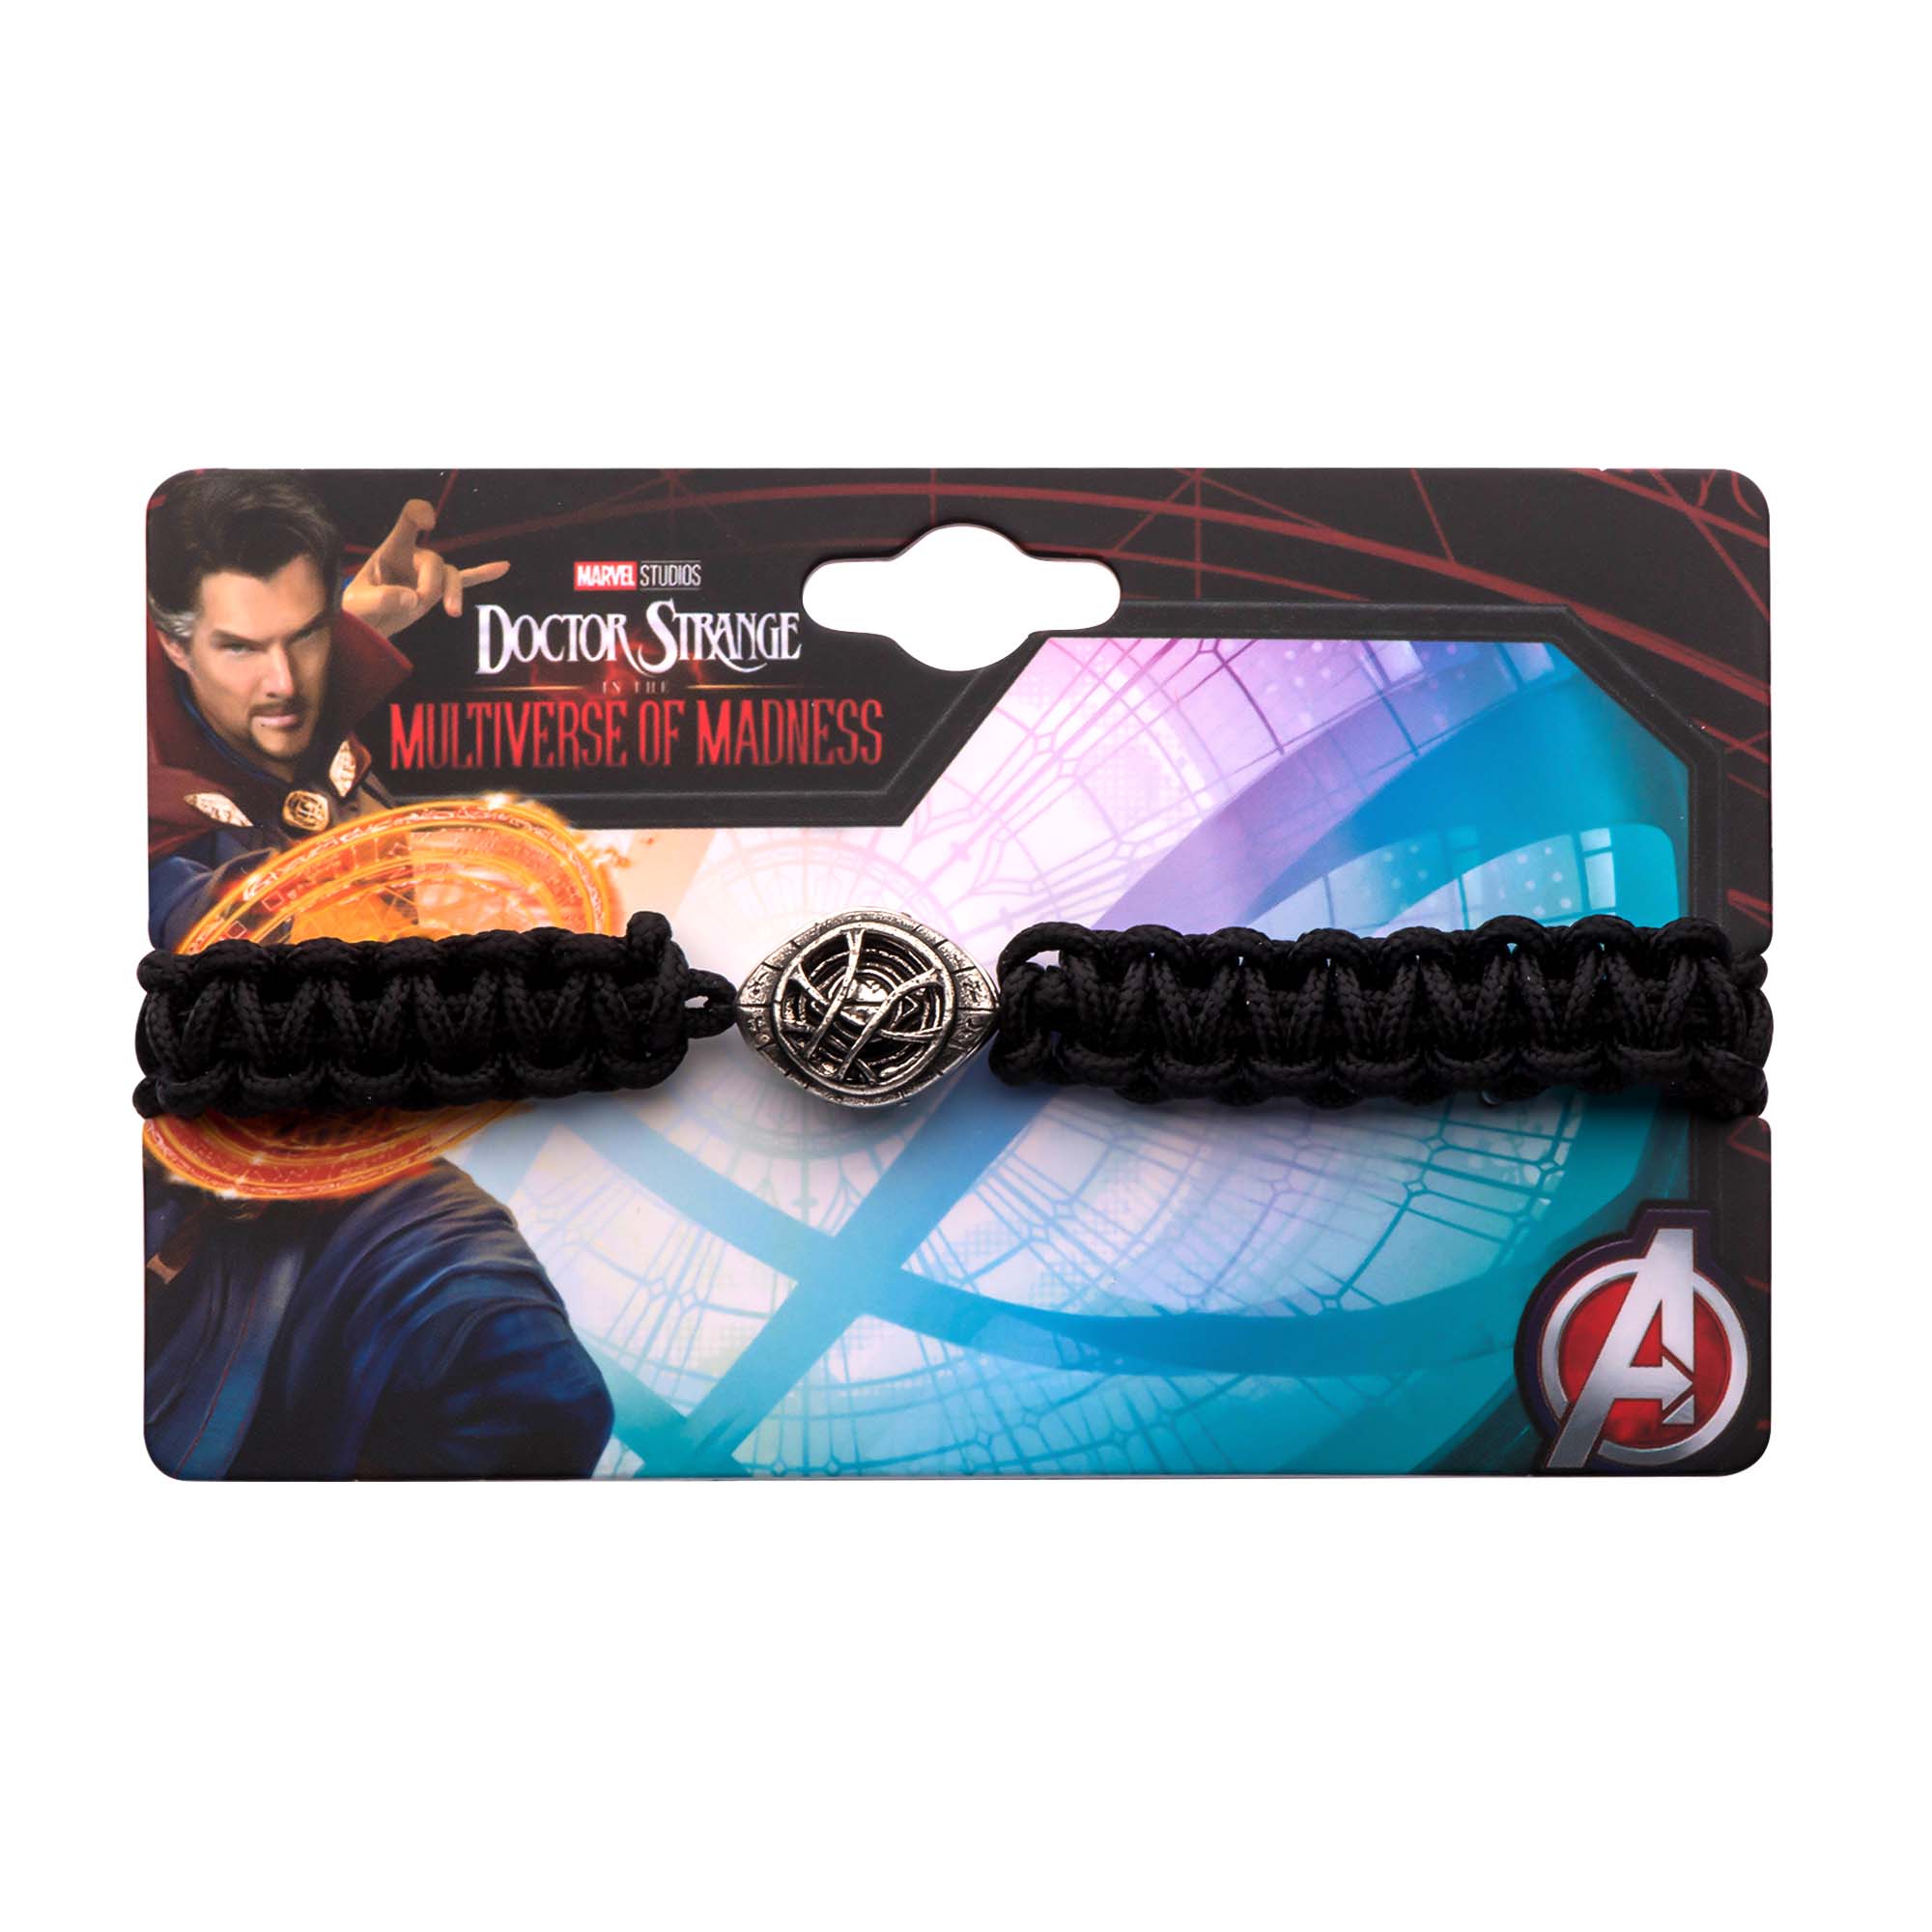 Marvel's Doctor Strange in the Multiverse of Madness Eye of Agamotto charm on paracord bracelet